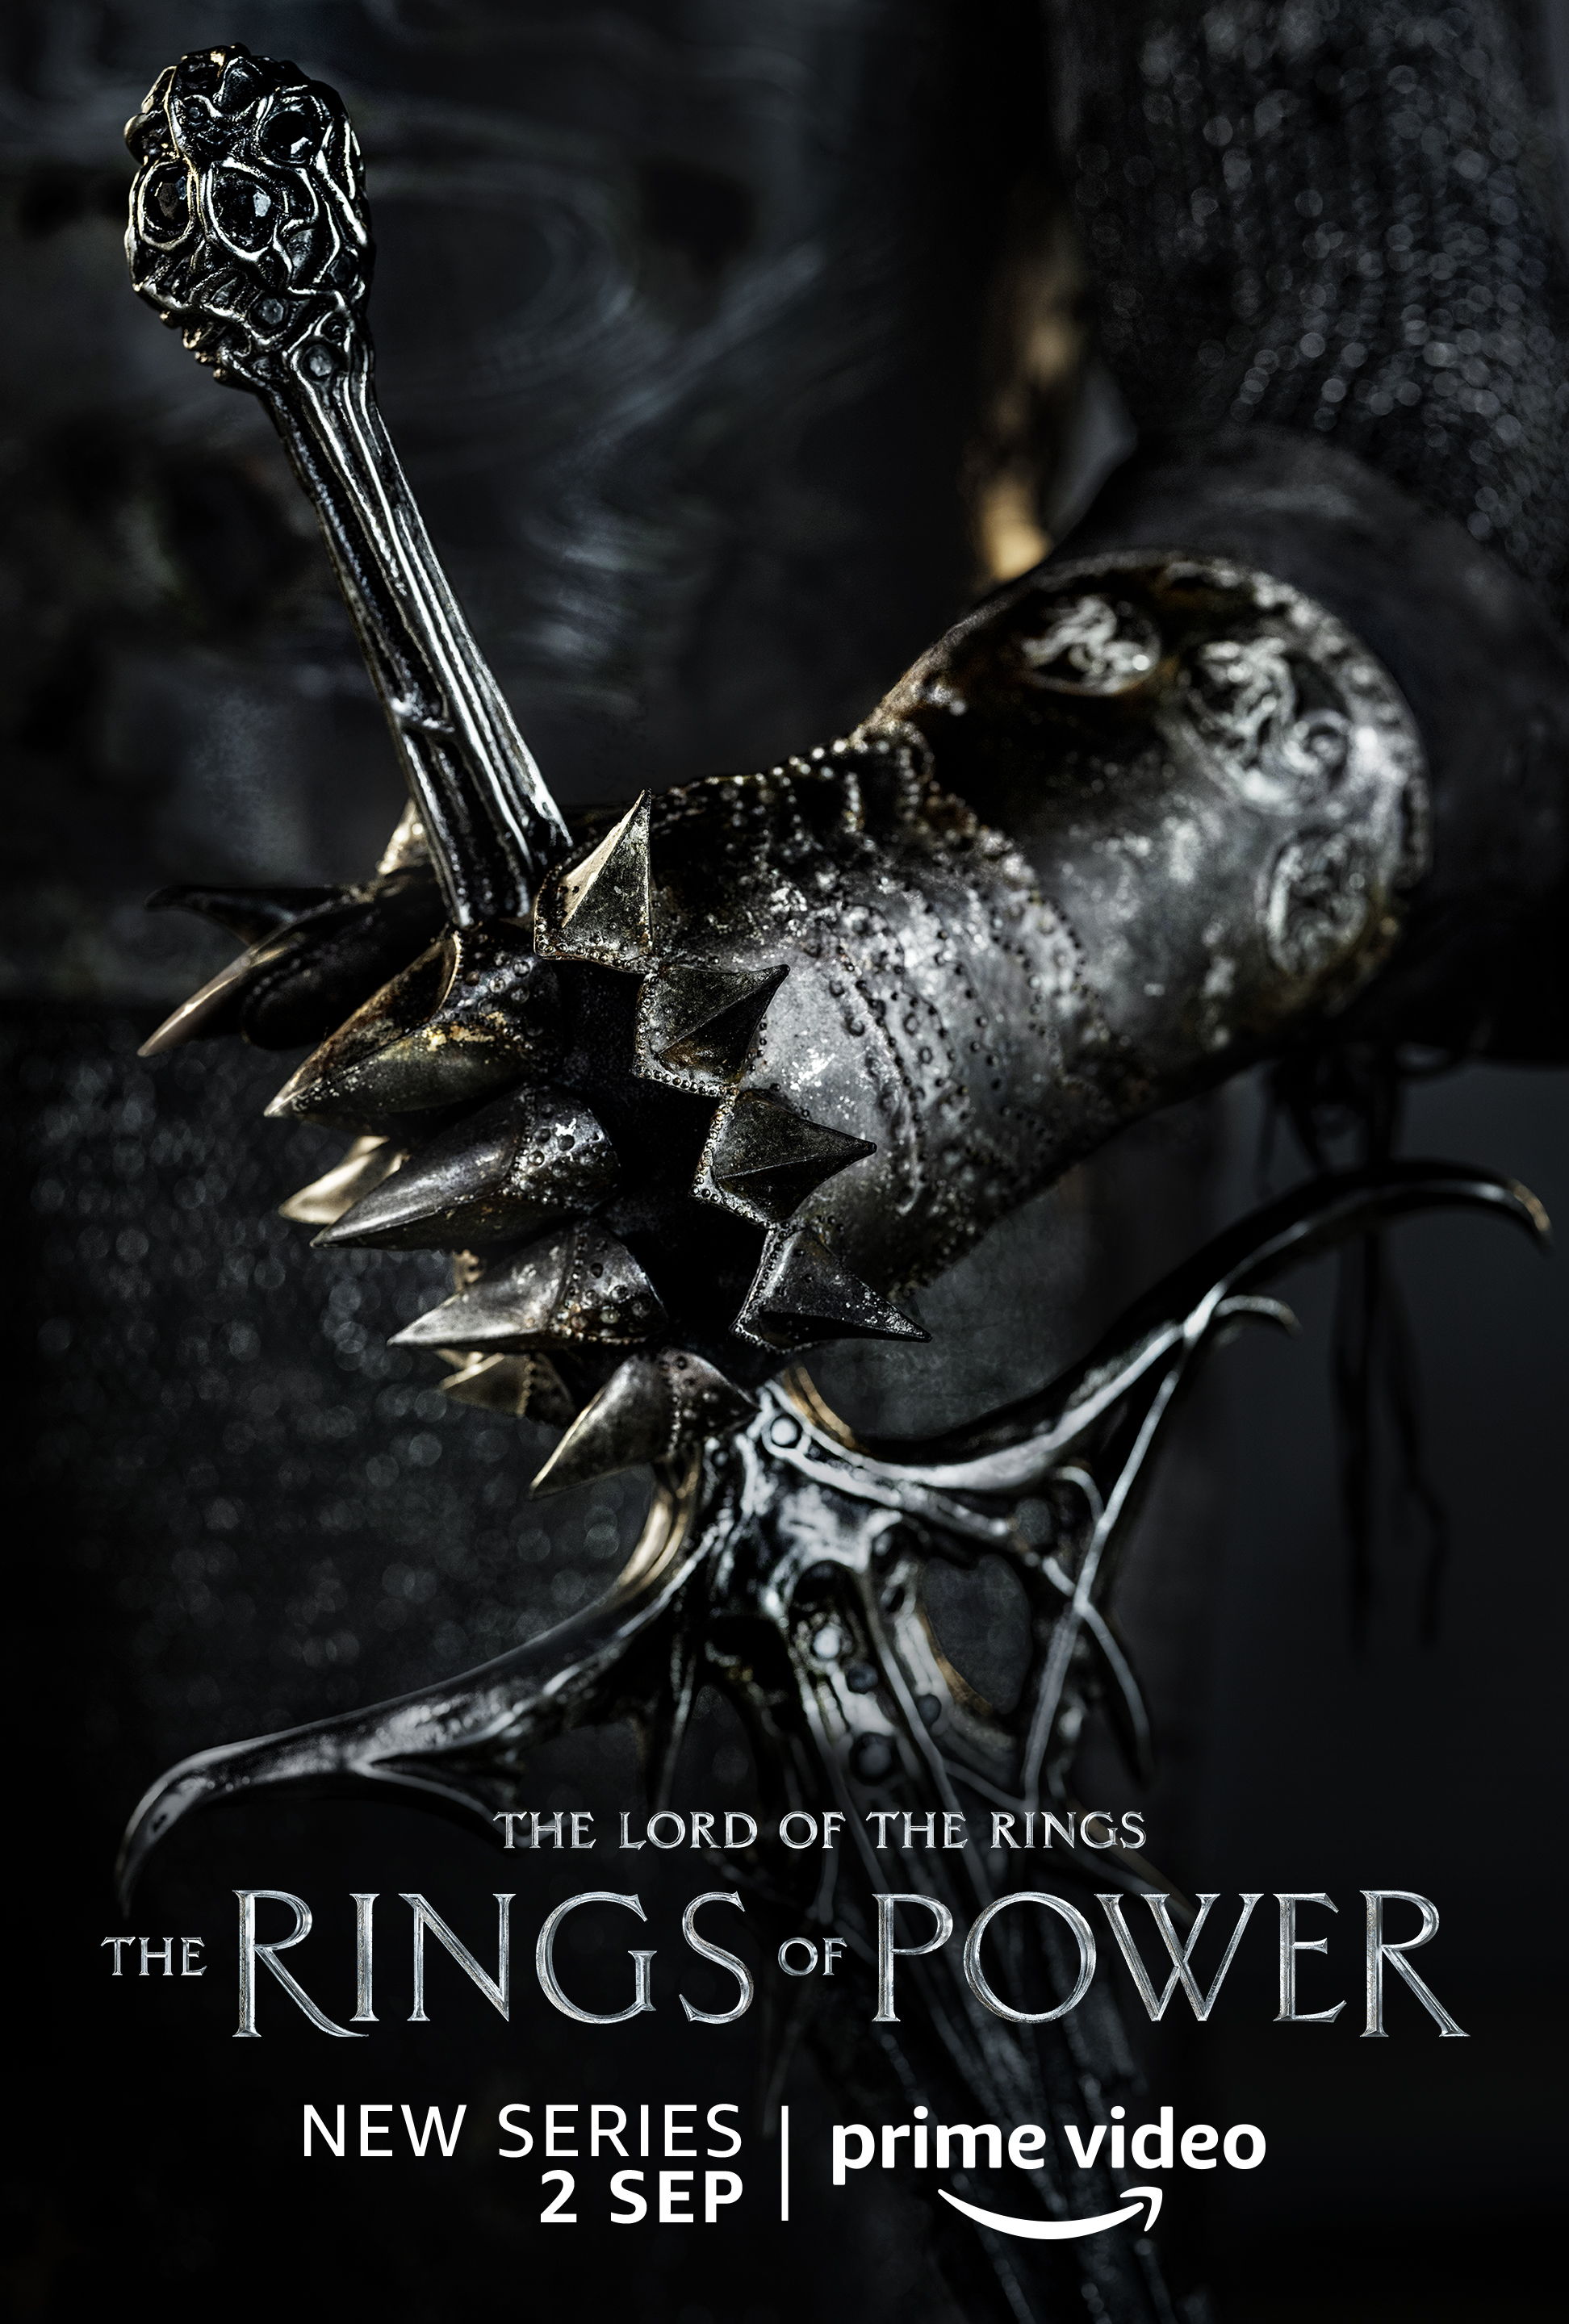 A Sauron character poster for Lord of the Rings: The Rings of Power